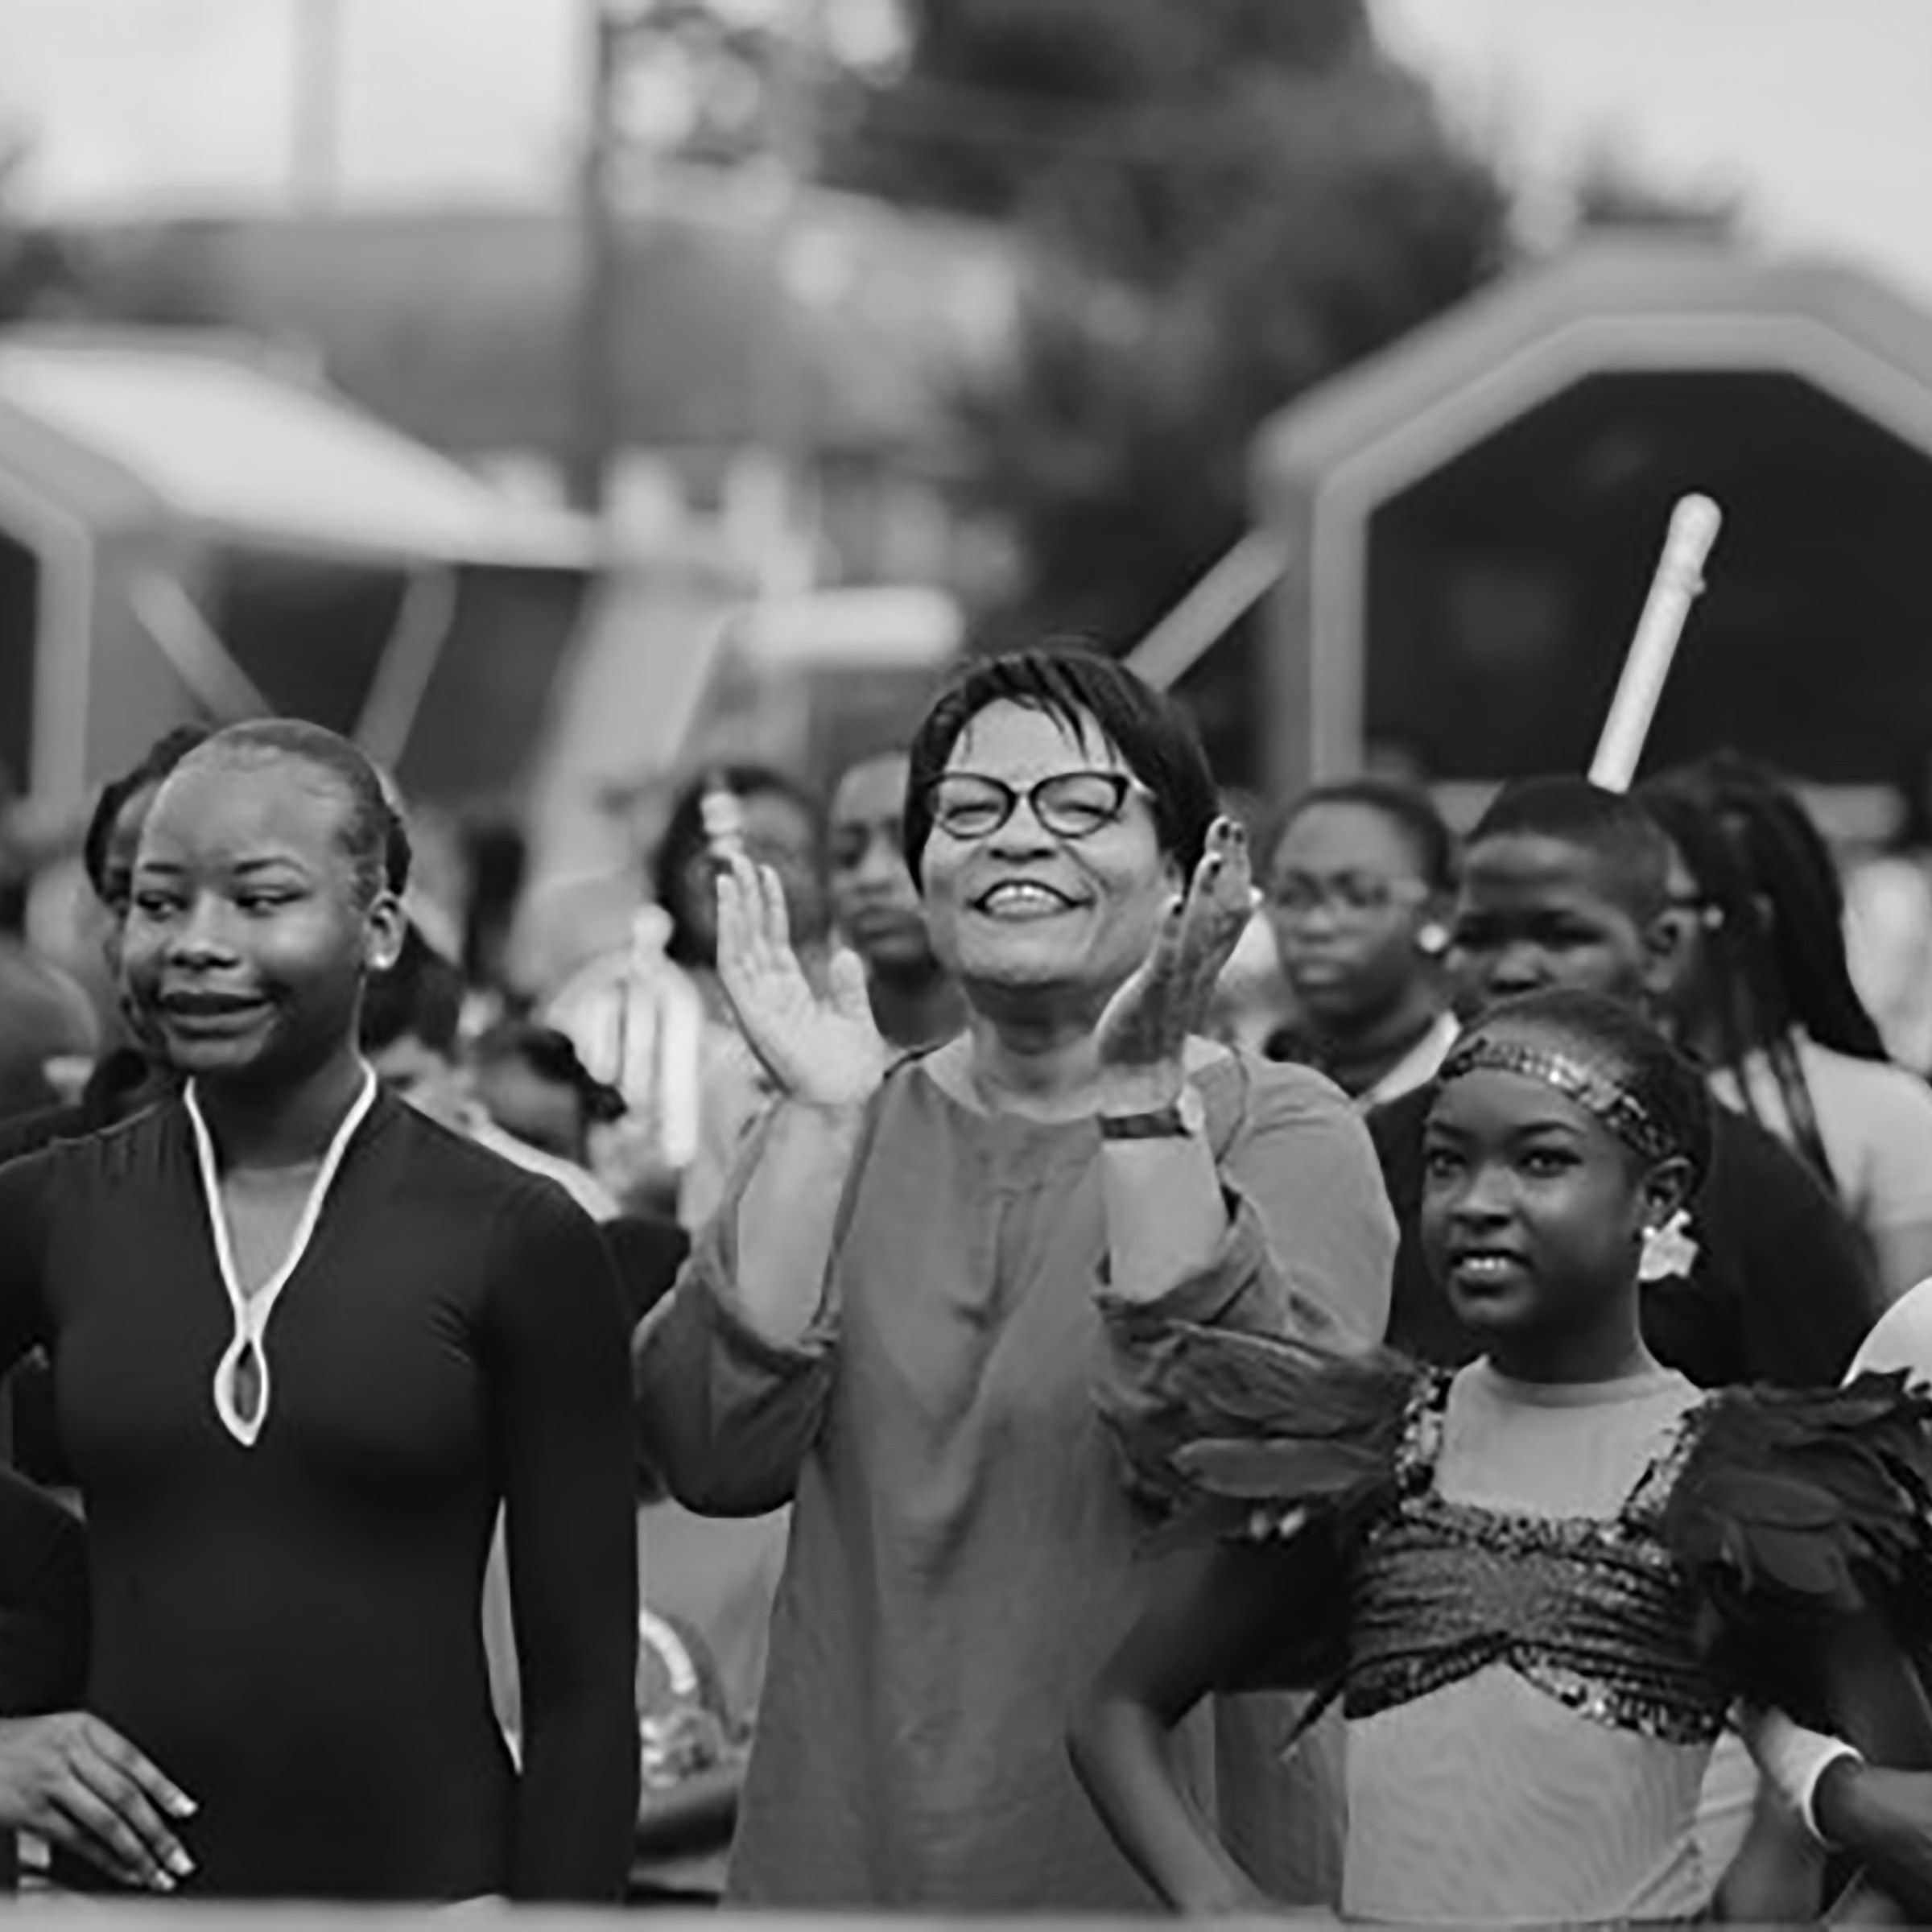 Photo of Mayer Latoya Cantrell alongside New Orleans children and natives marching in parade